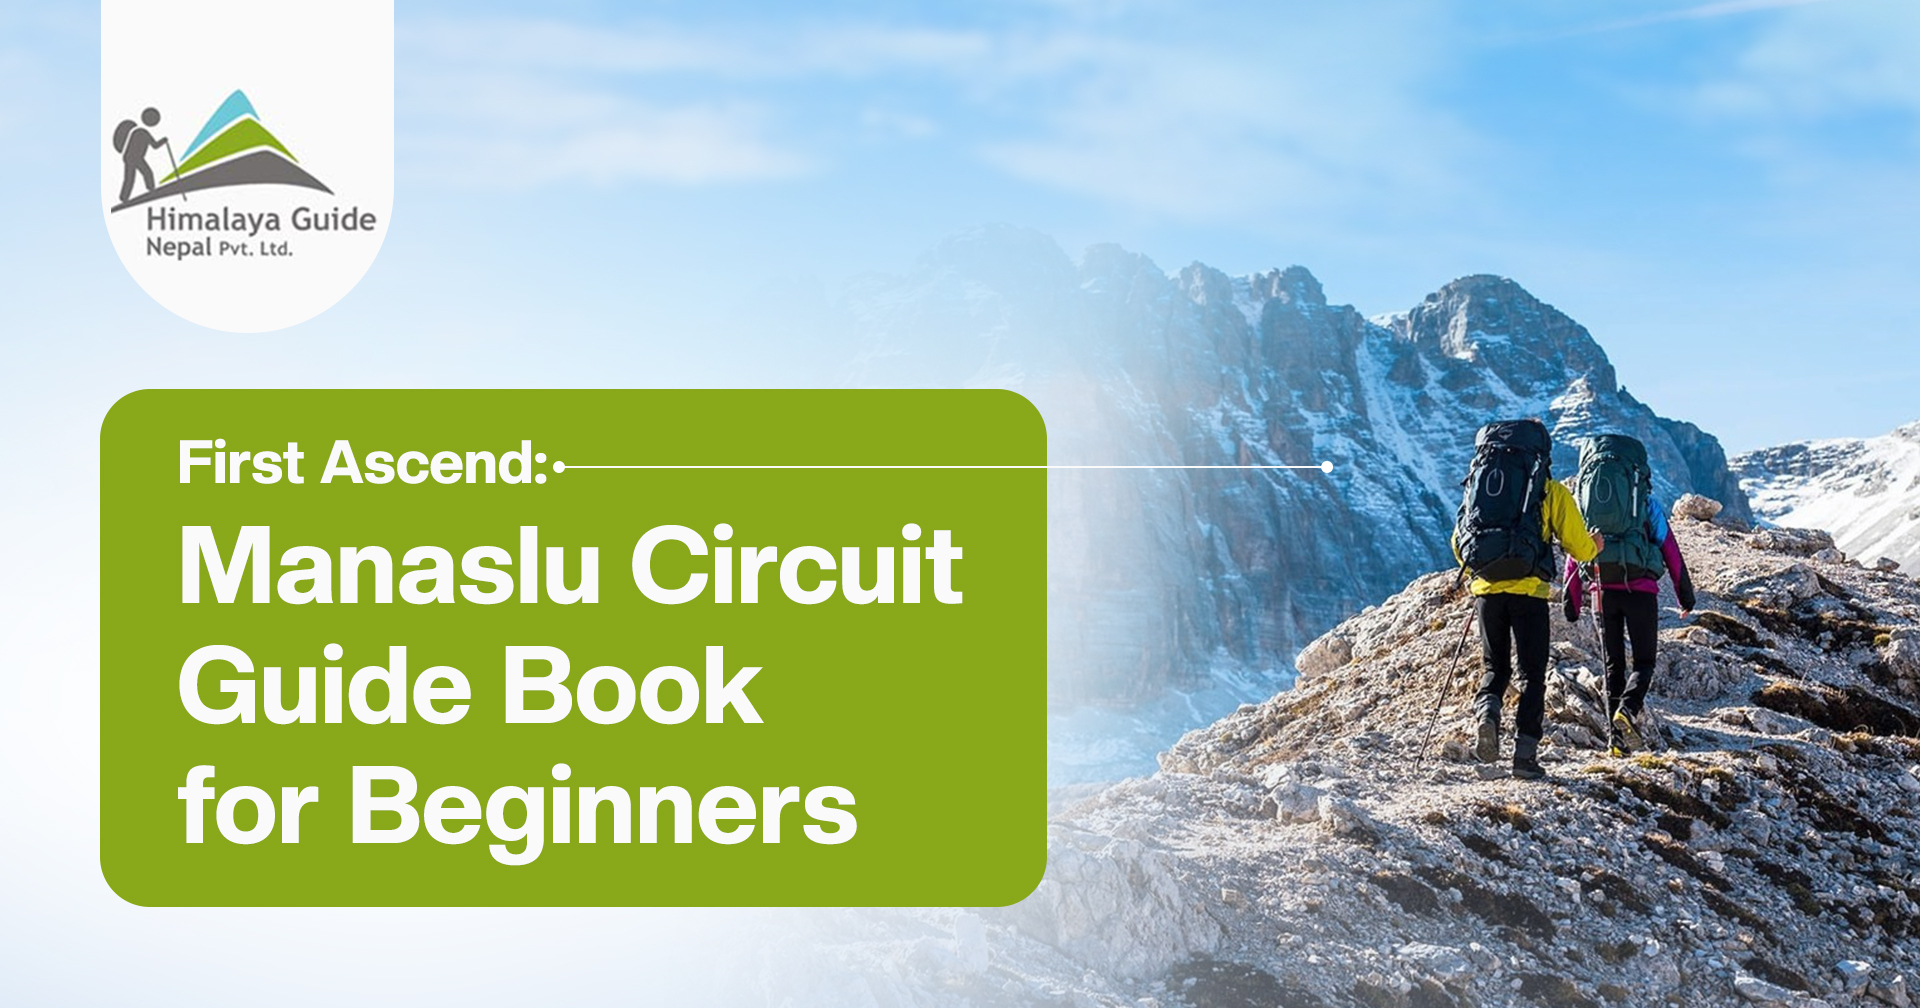 First Ascend: Manaslu Circuit Guide Book for Beginners